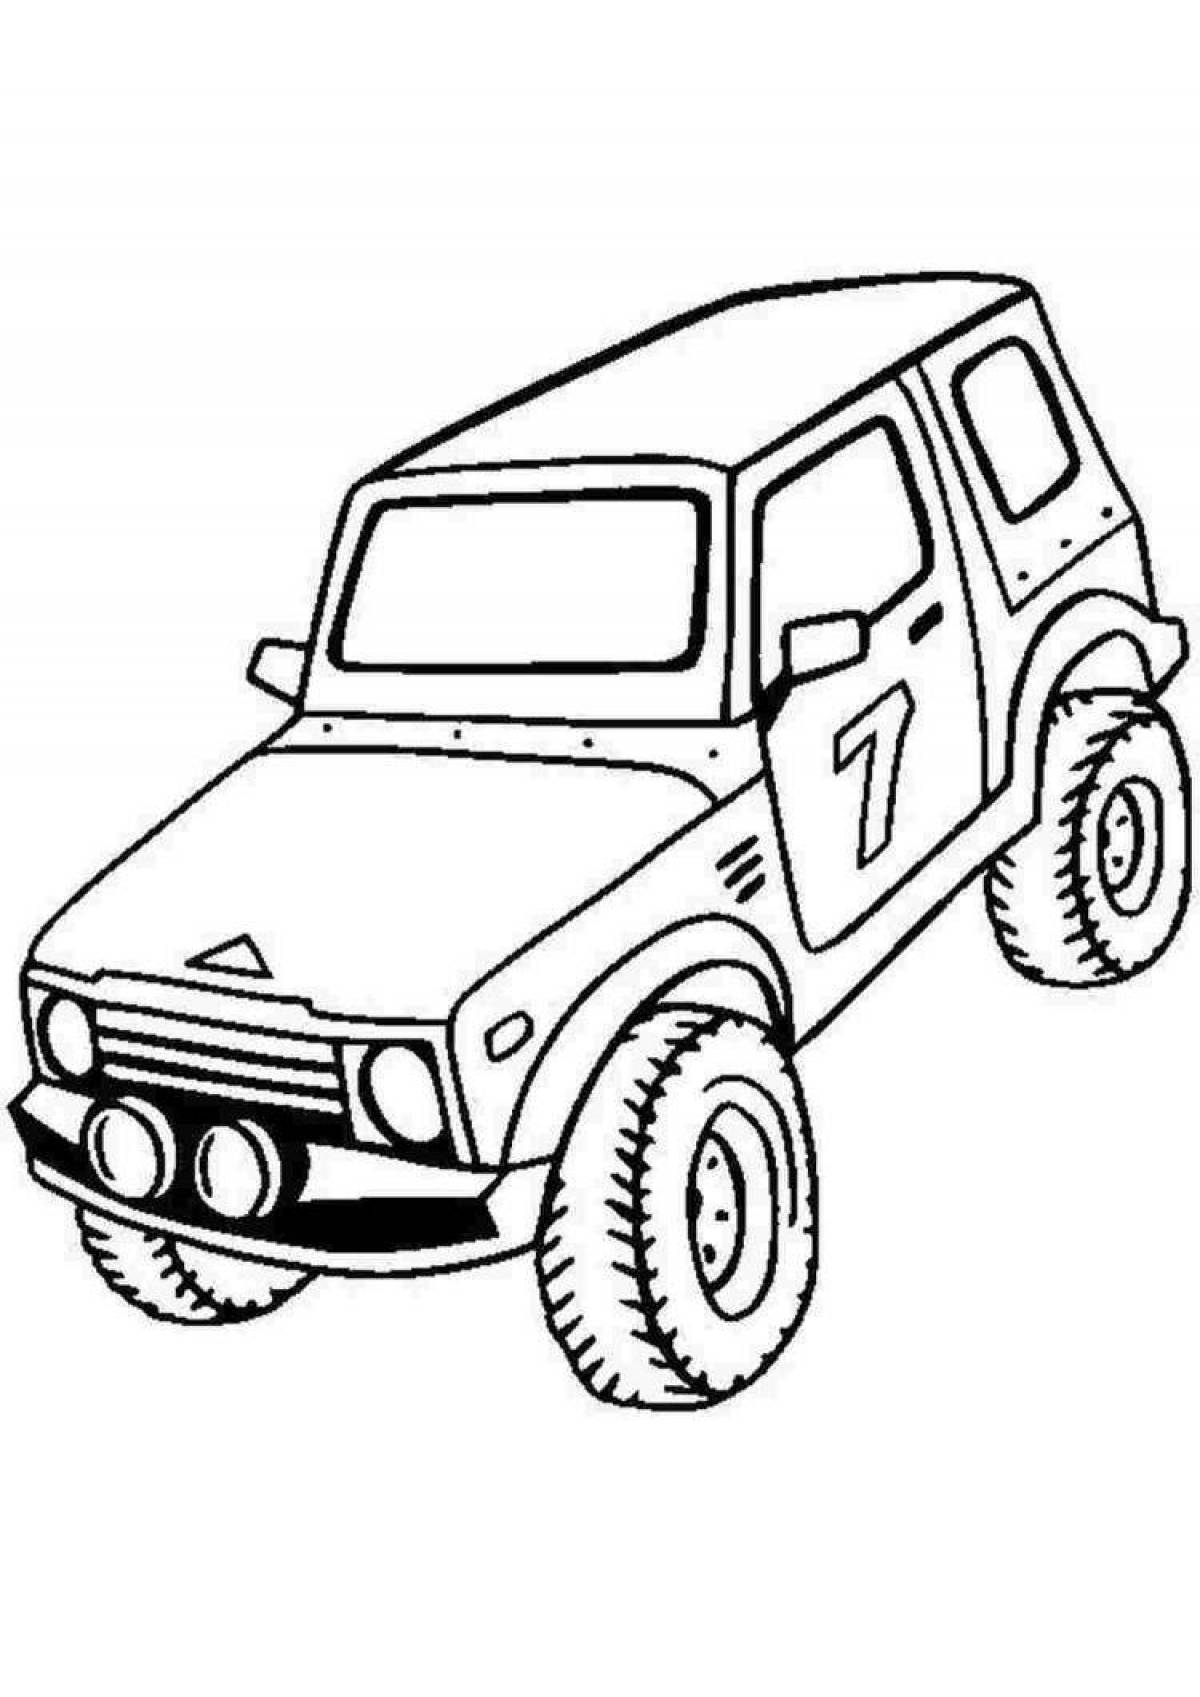 Coloring page wild cars niva